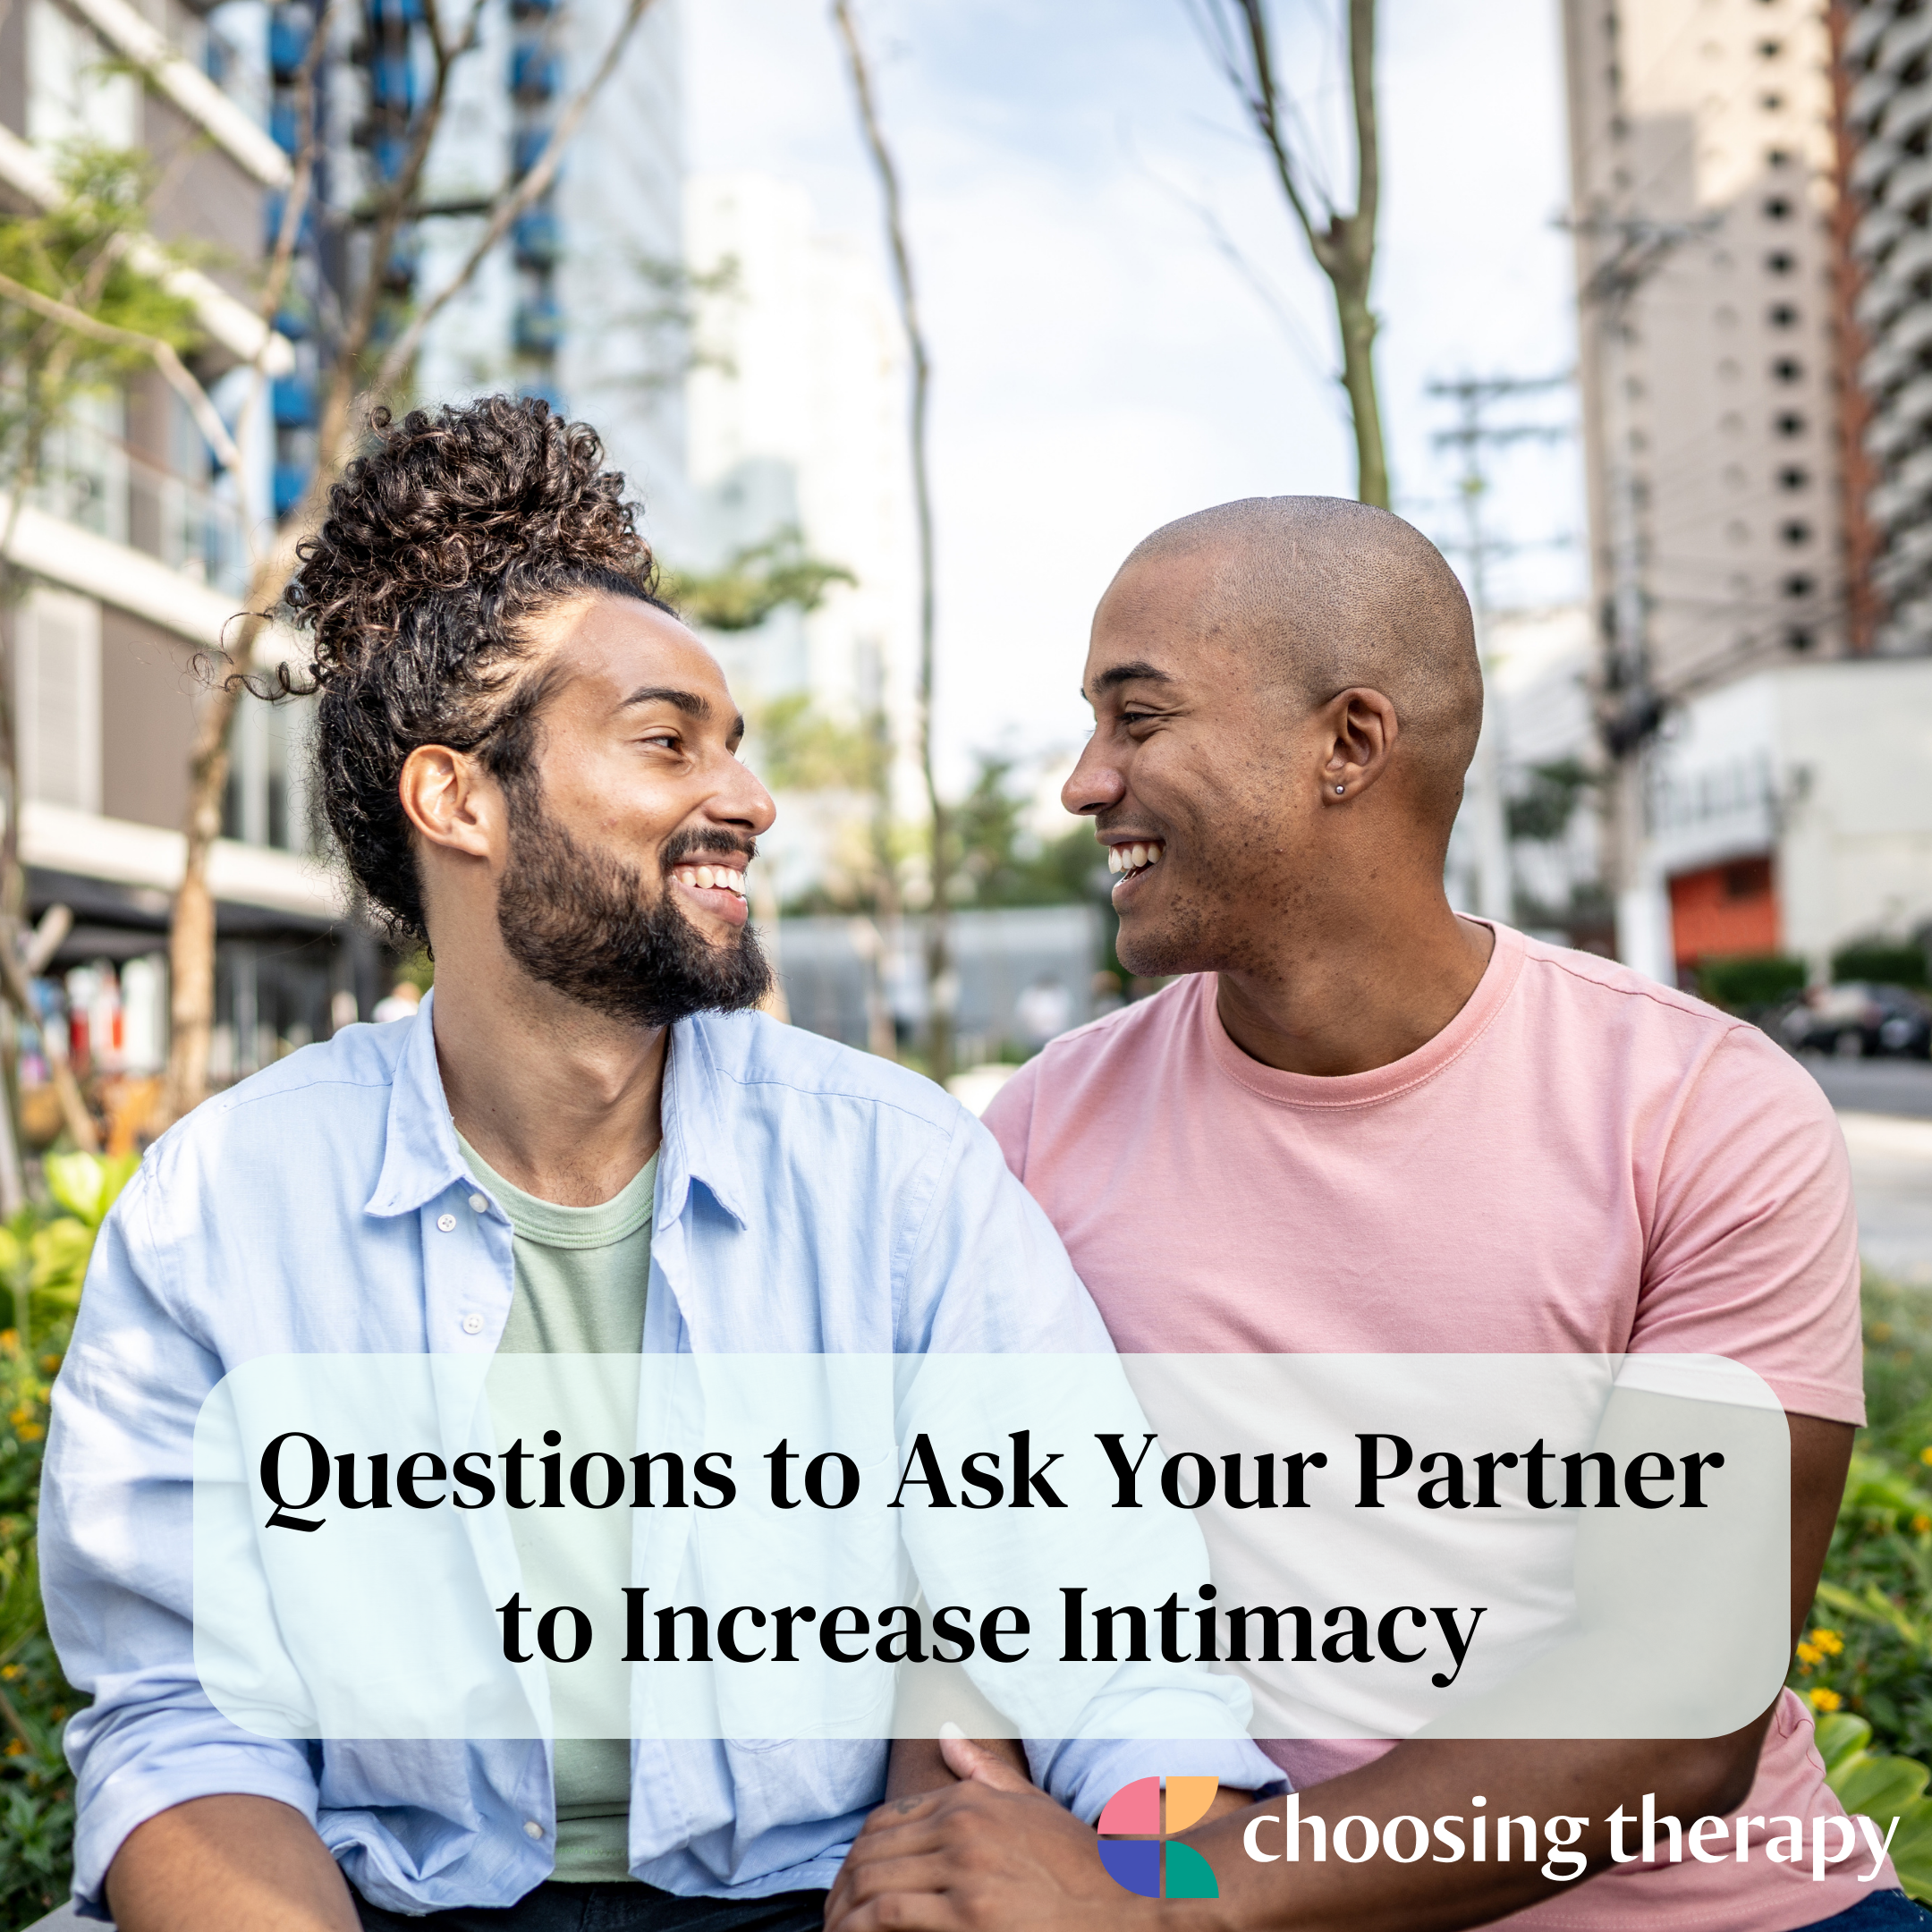 Questions to Ask Your Partner to Increase Intimacy